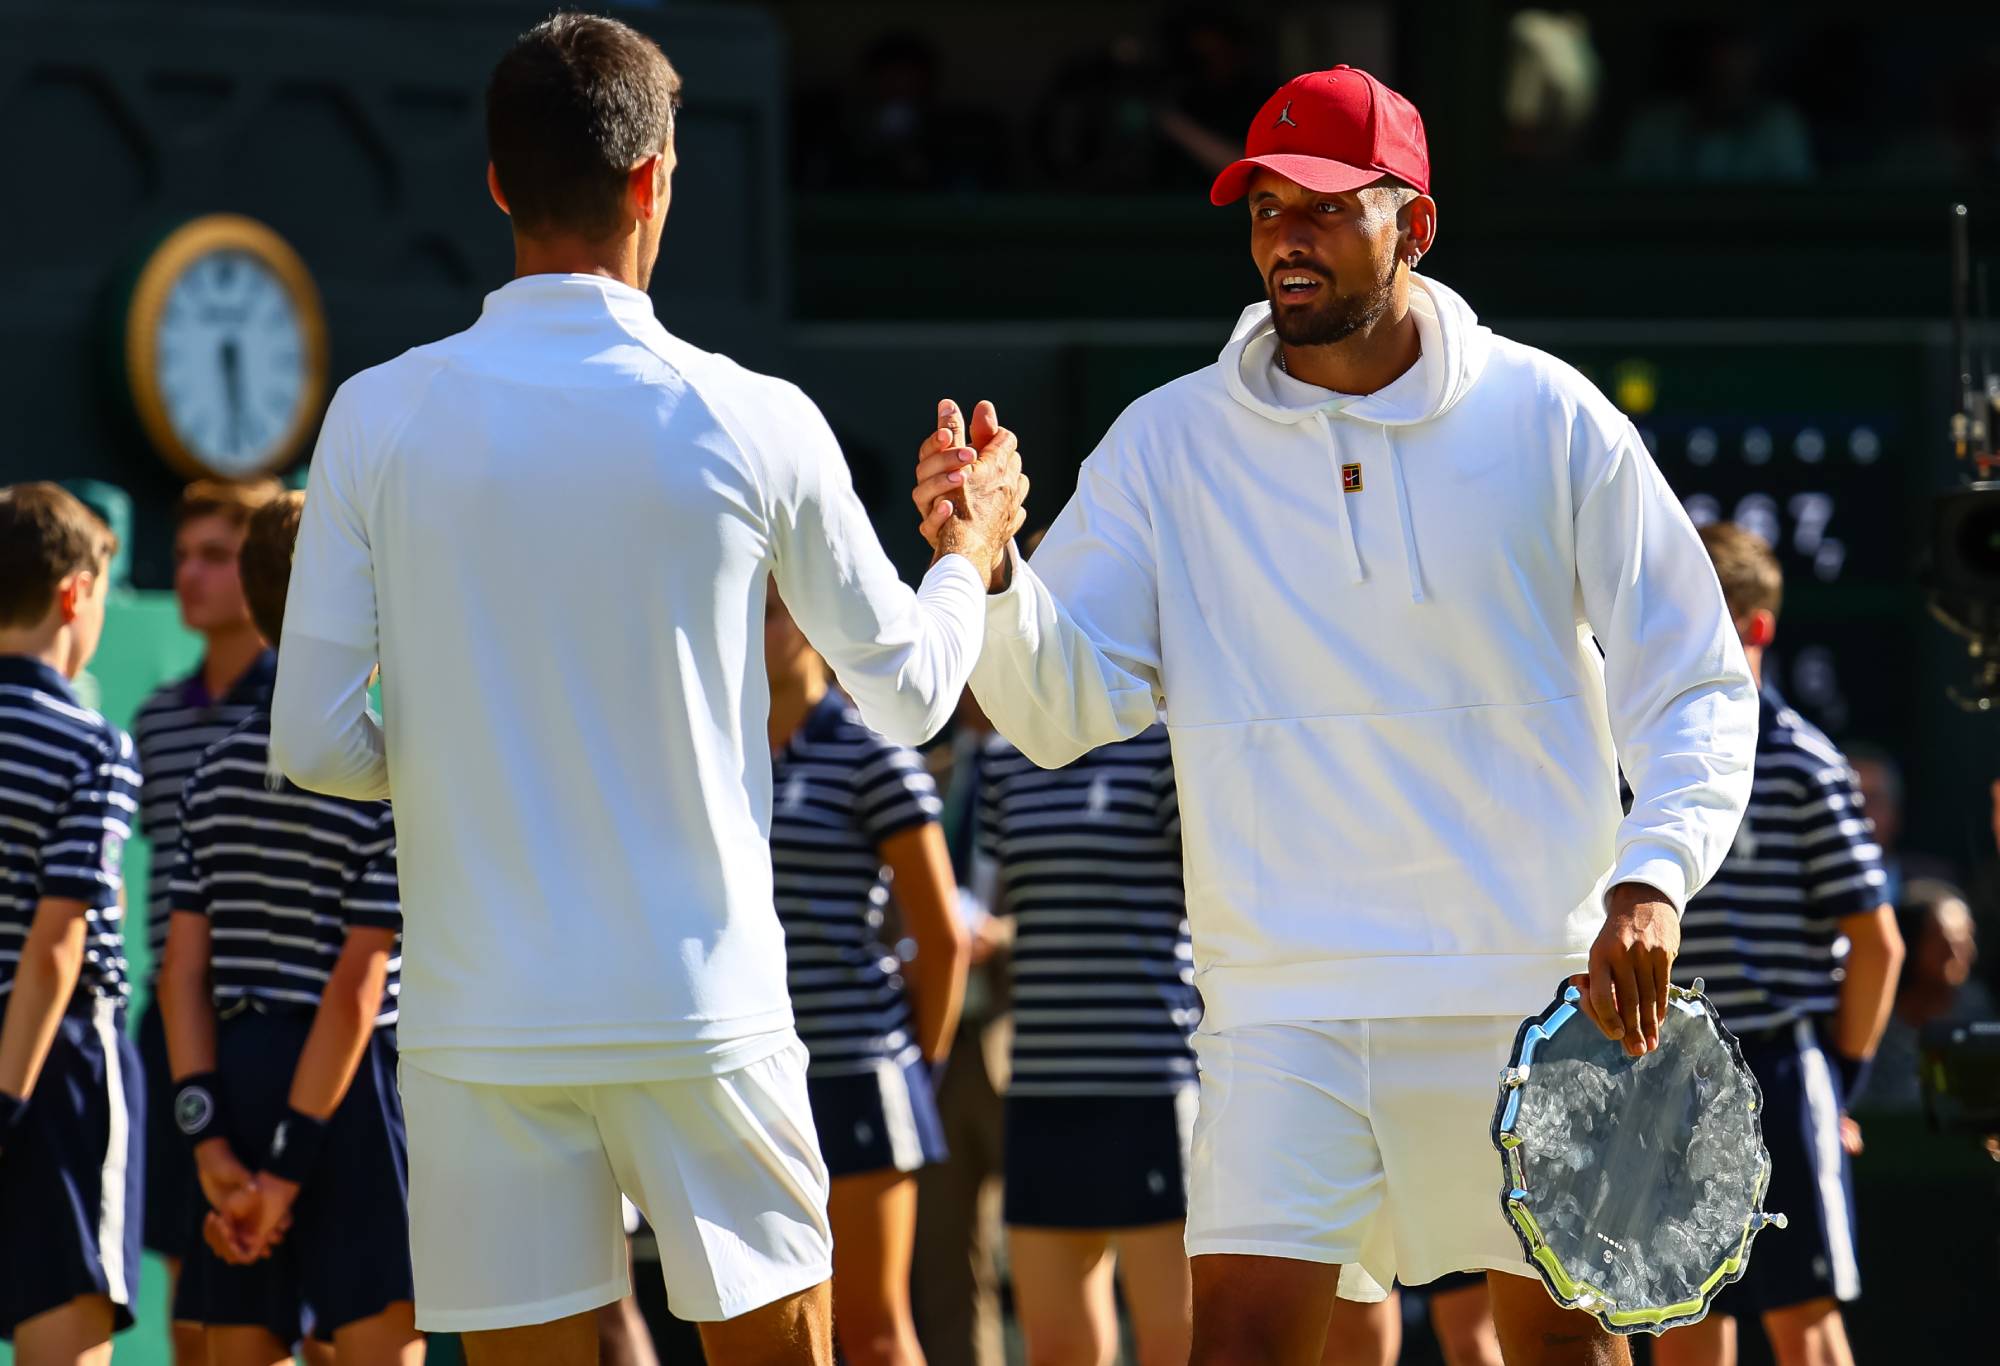 Nick Kyrgios of Australia congratulates Novak Djokovic of Serbia after their match during day fourteen of The Championships Wimbledon 2022 at All England Lawn Tennis and Croquet Club on July 10, 2022 in London, England. (Photo by Frey/TPN/Getty Images)